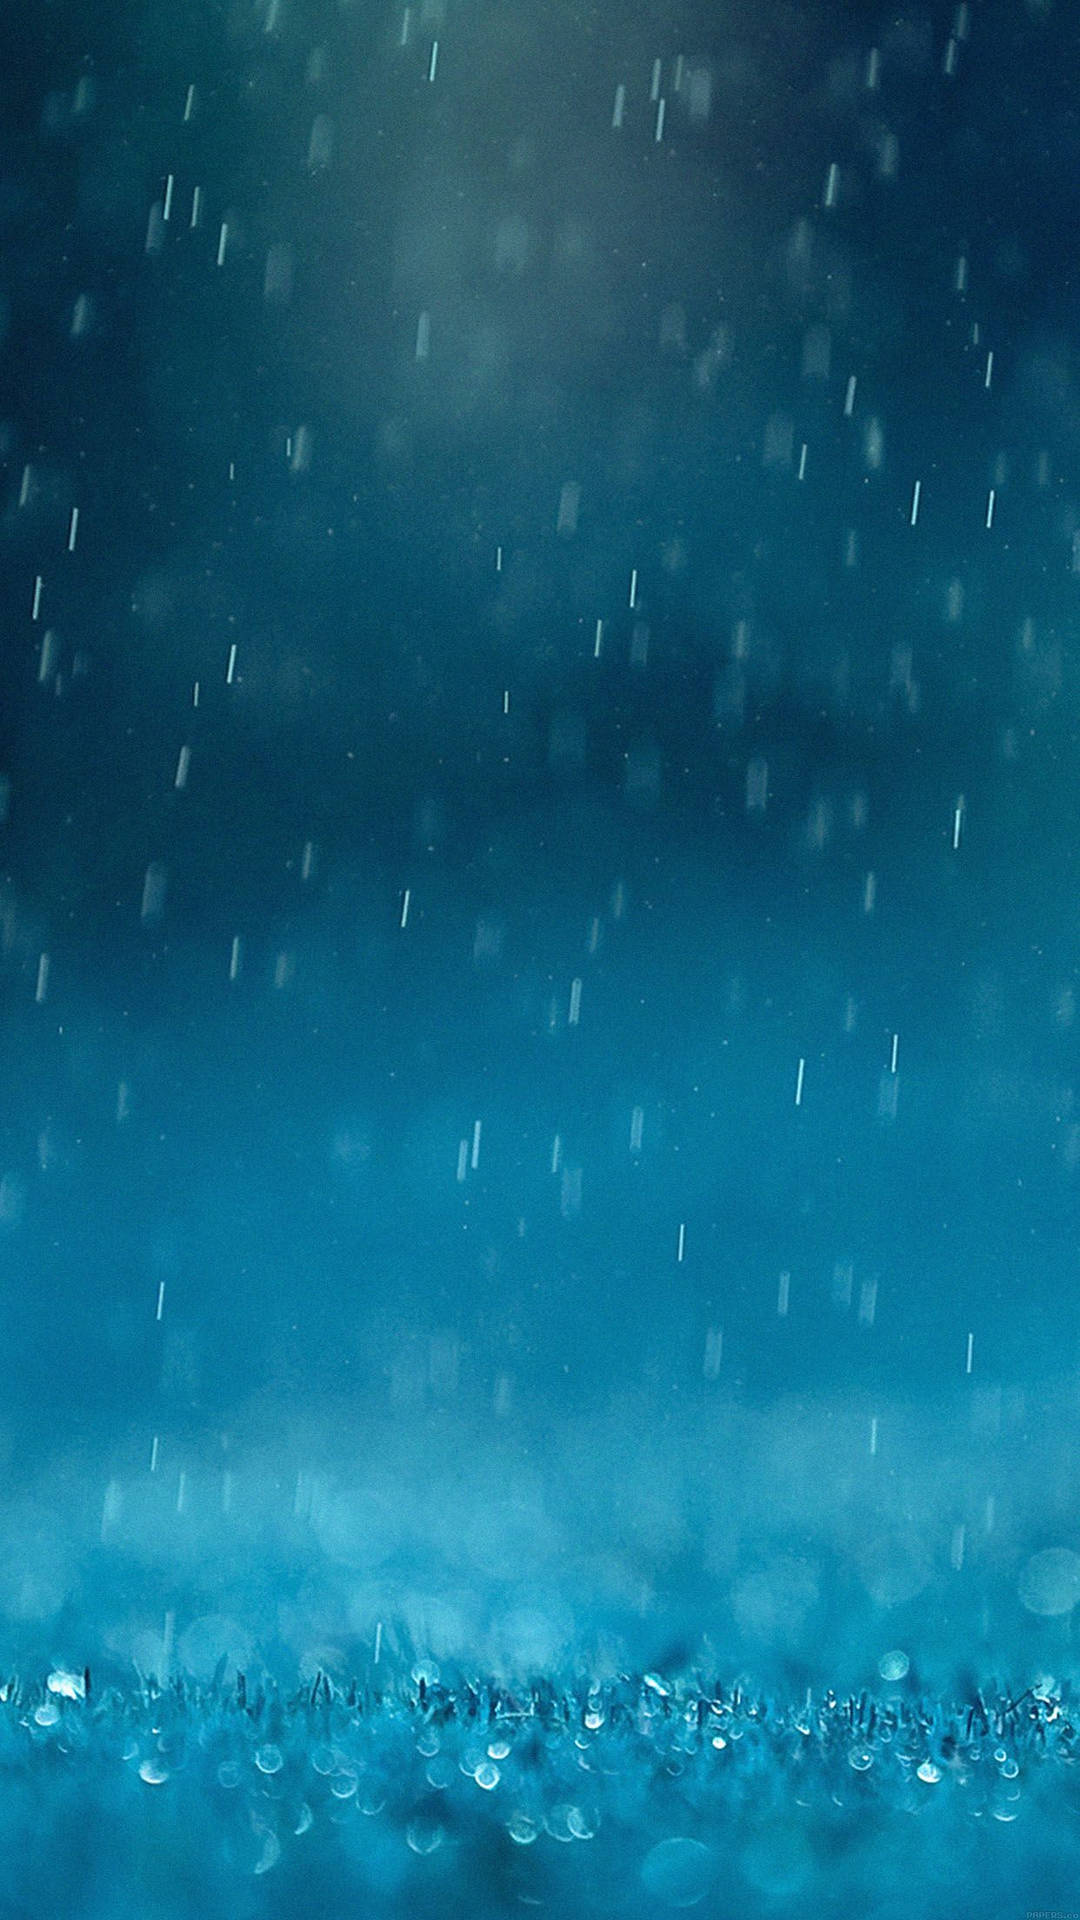 Enjoying a Summer Rainy Day with an Iphone Wallpaper